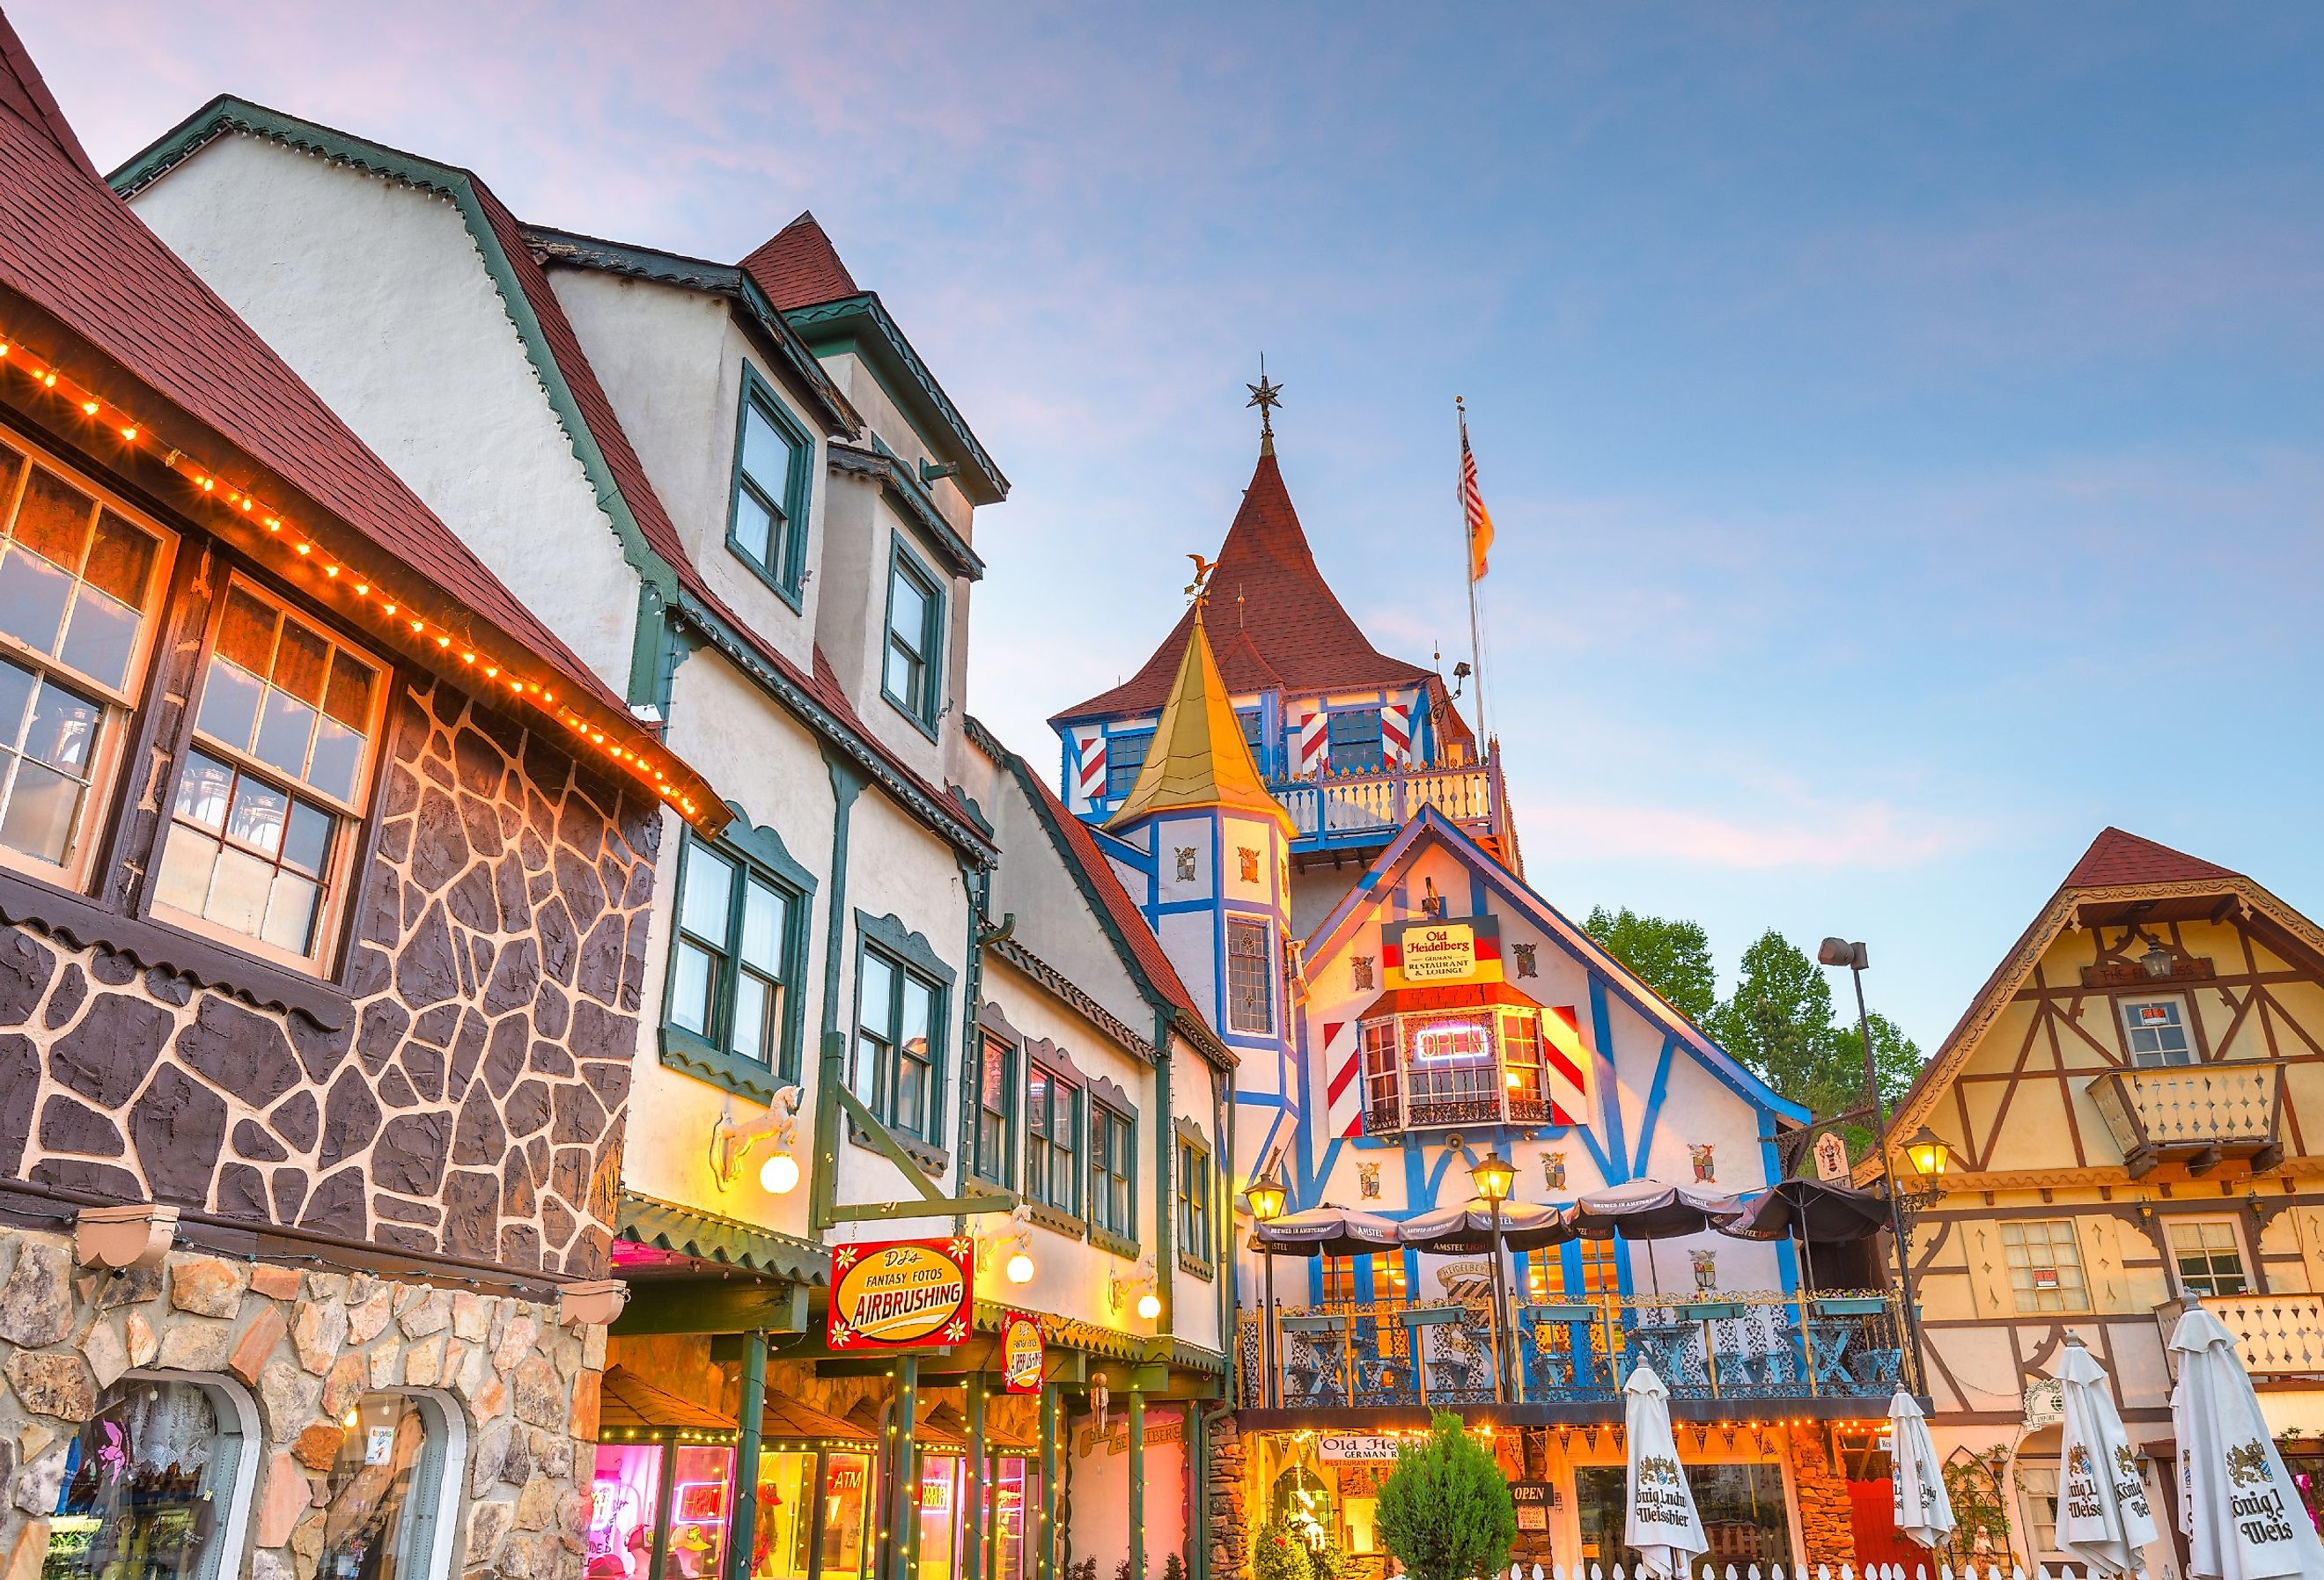 Helen, Georgia, a replica of a Bavarian alpine town catering mainly to tourism and the German style architecture. Image credit Sean Pavone via Shutterstock